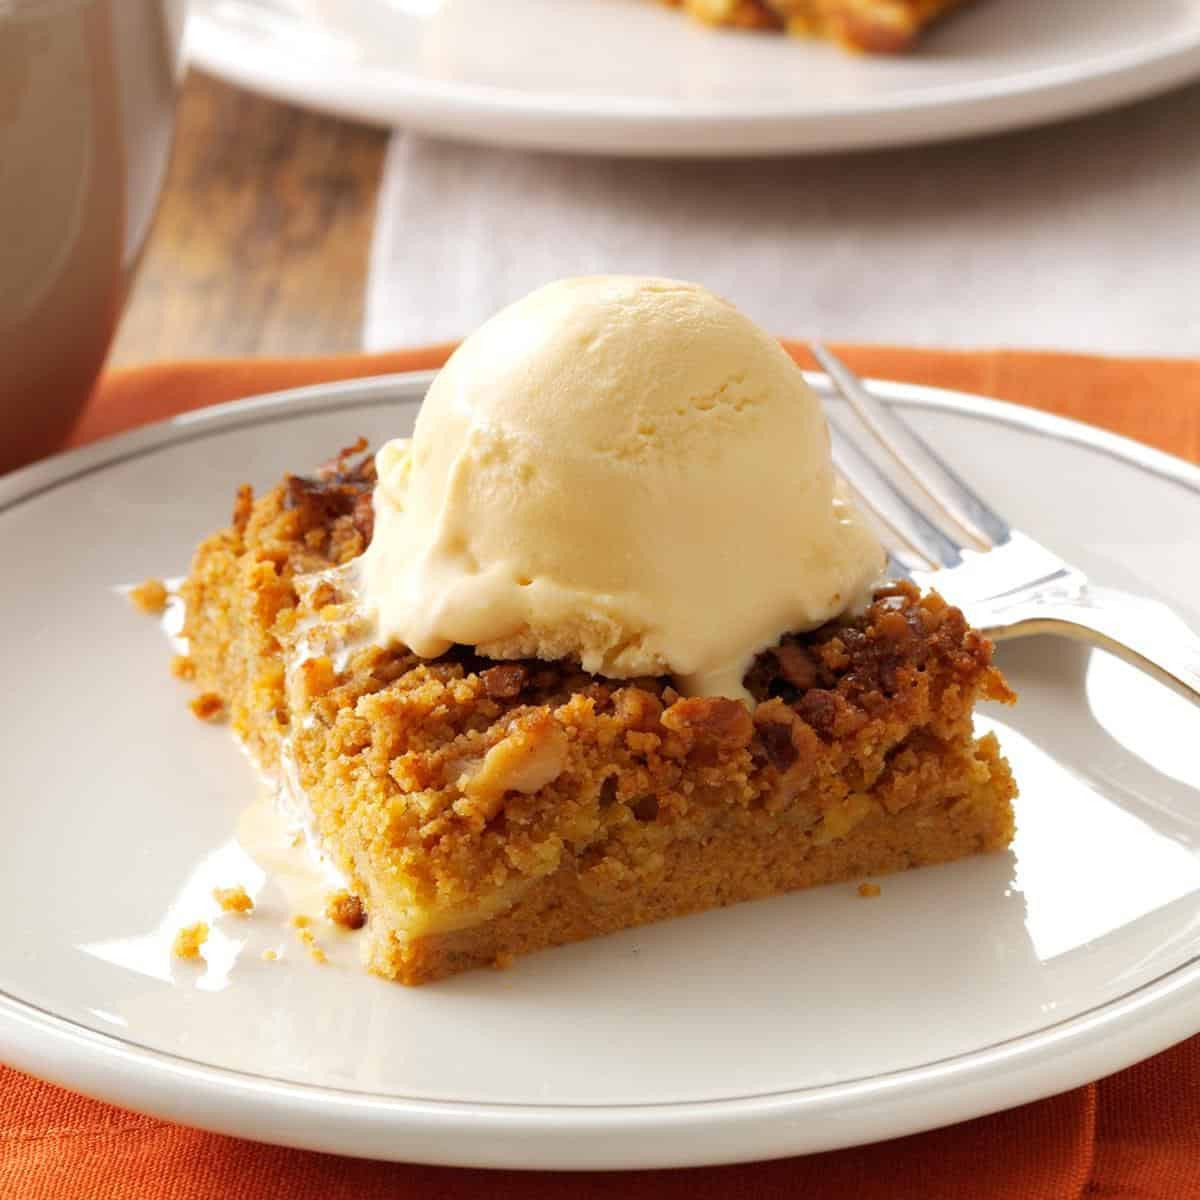 Recipes For Fall Desserts
 15 Mouth Watering Pumpkin Flavoured Desserts for Fall